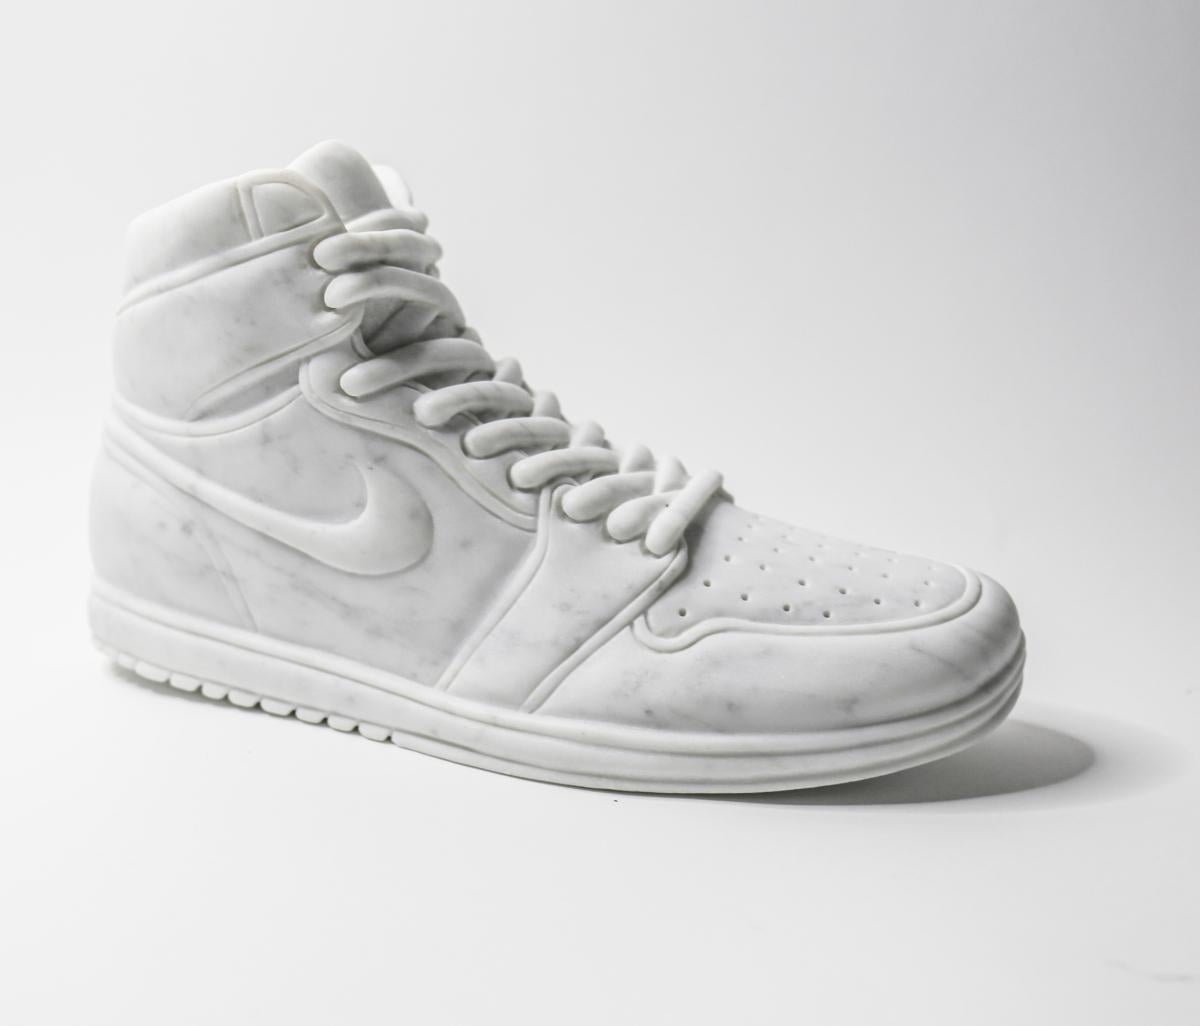 White Marble Nike Shoes /Clothing and Fashion Sculpture / 